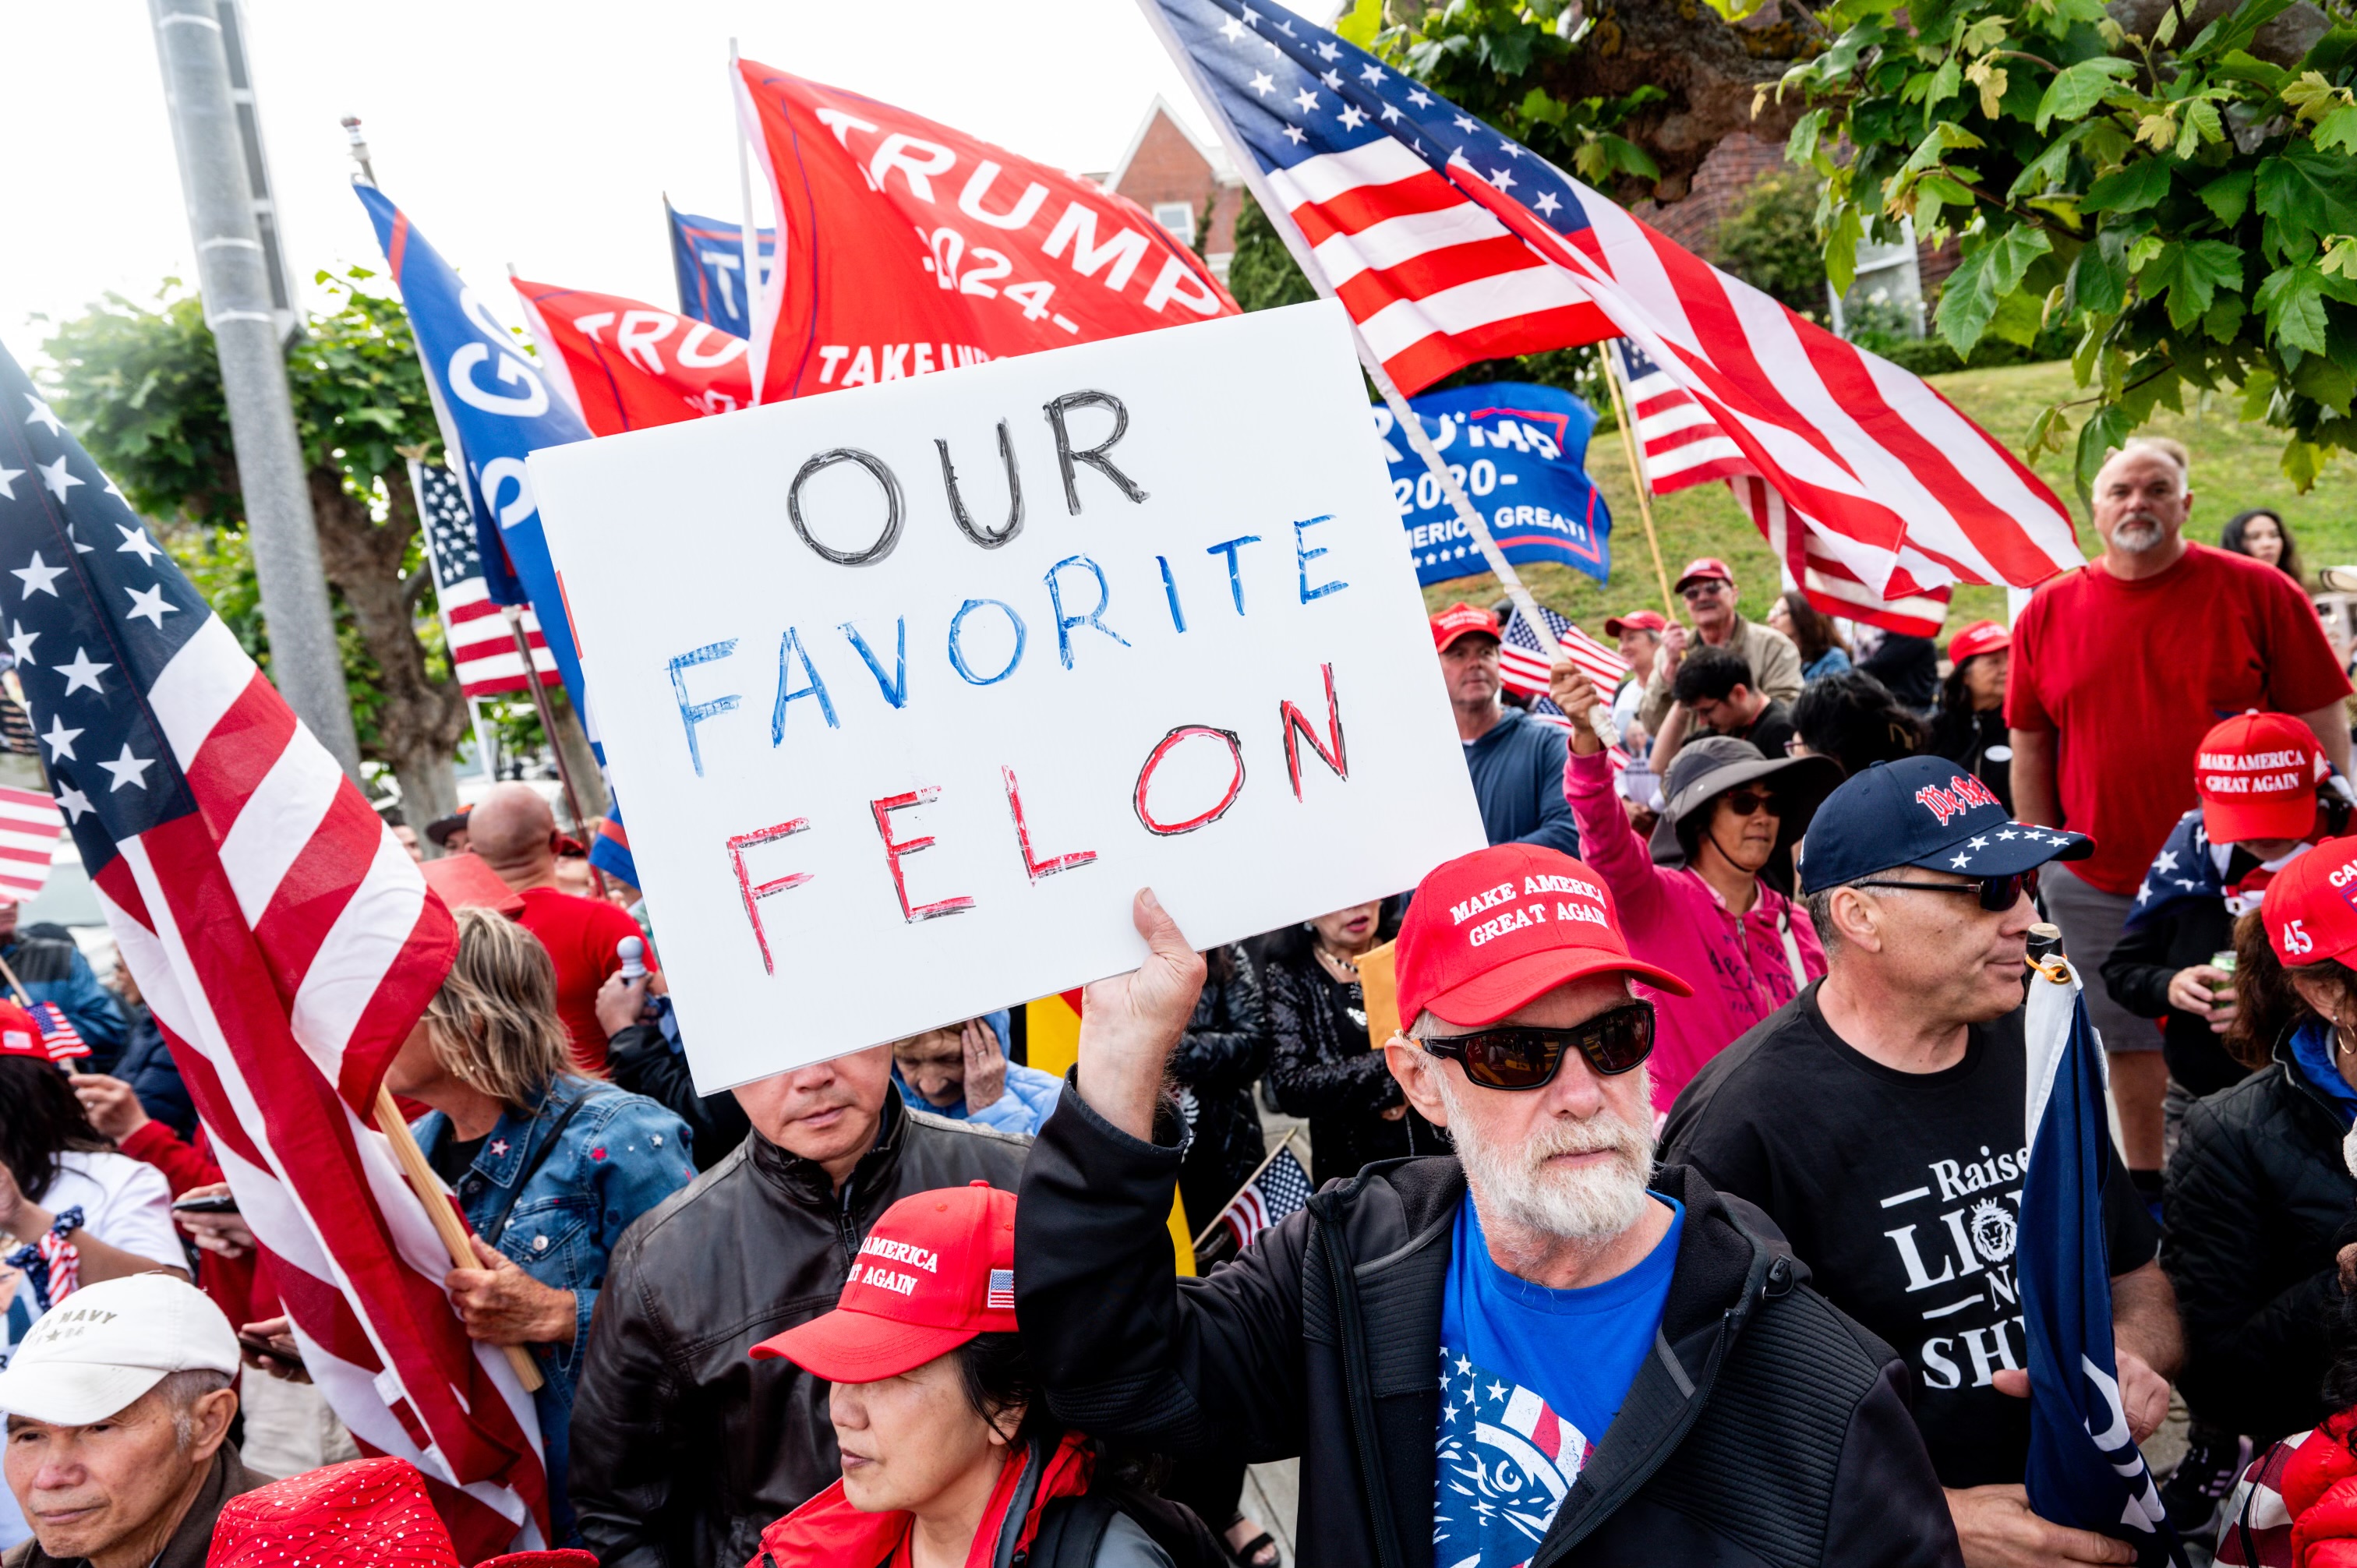 A crowd of people, many wearing red "Make America Great Again" hats, hold American flags and a sign that reads "OUR FAVORITE FELON" at a rally.